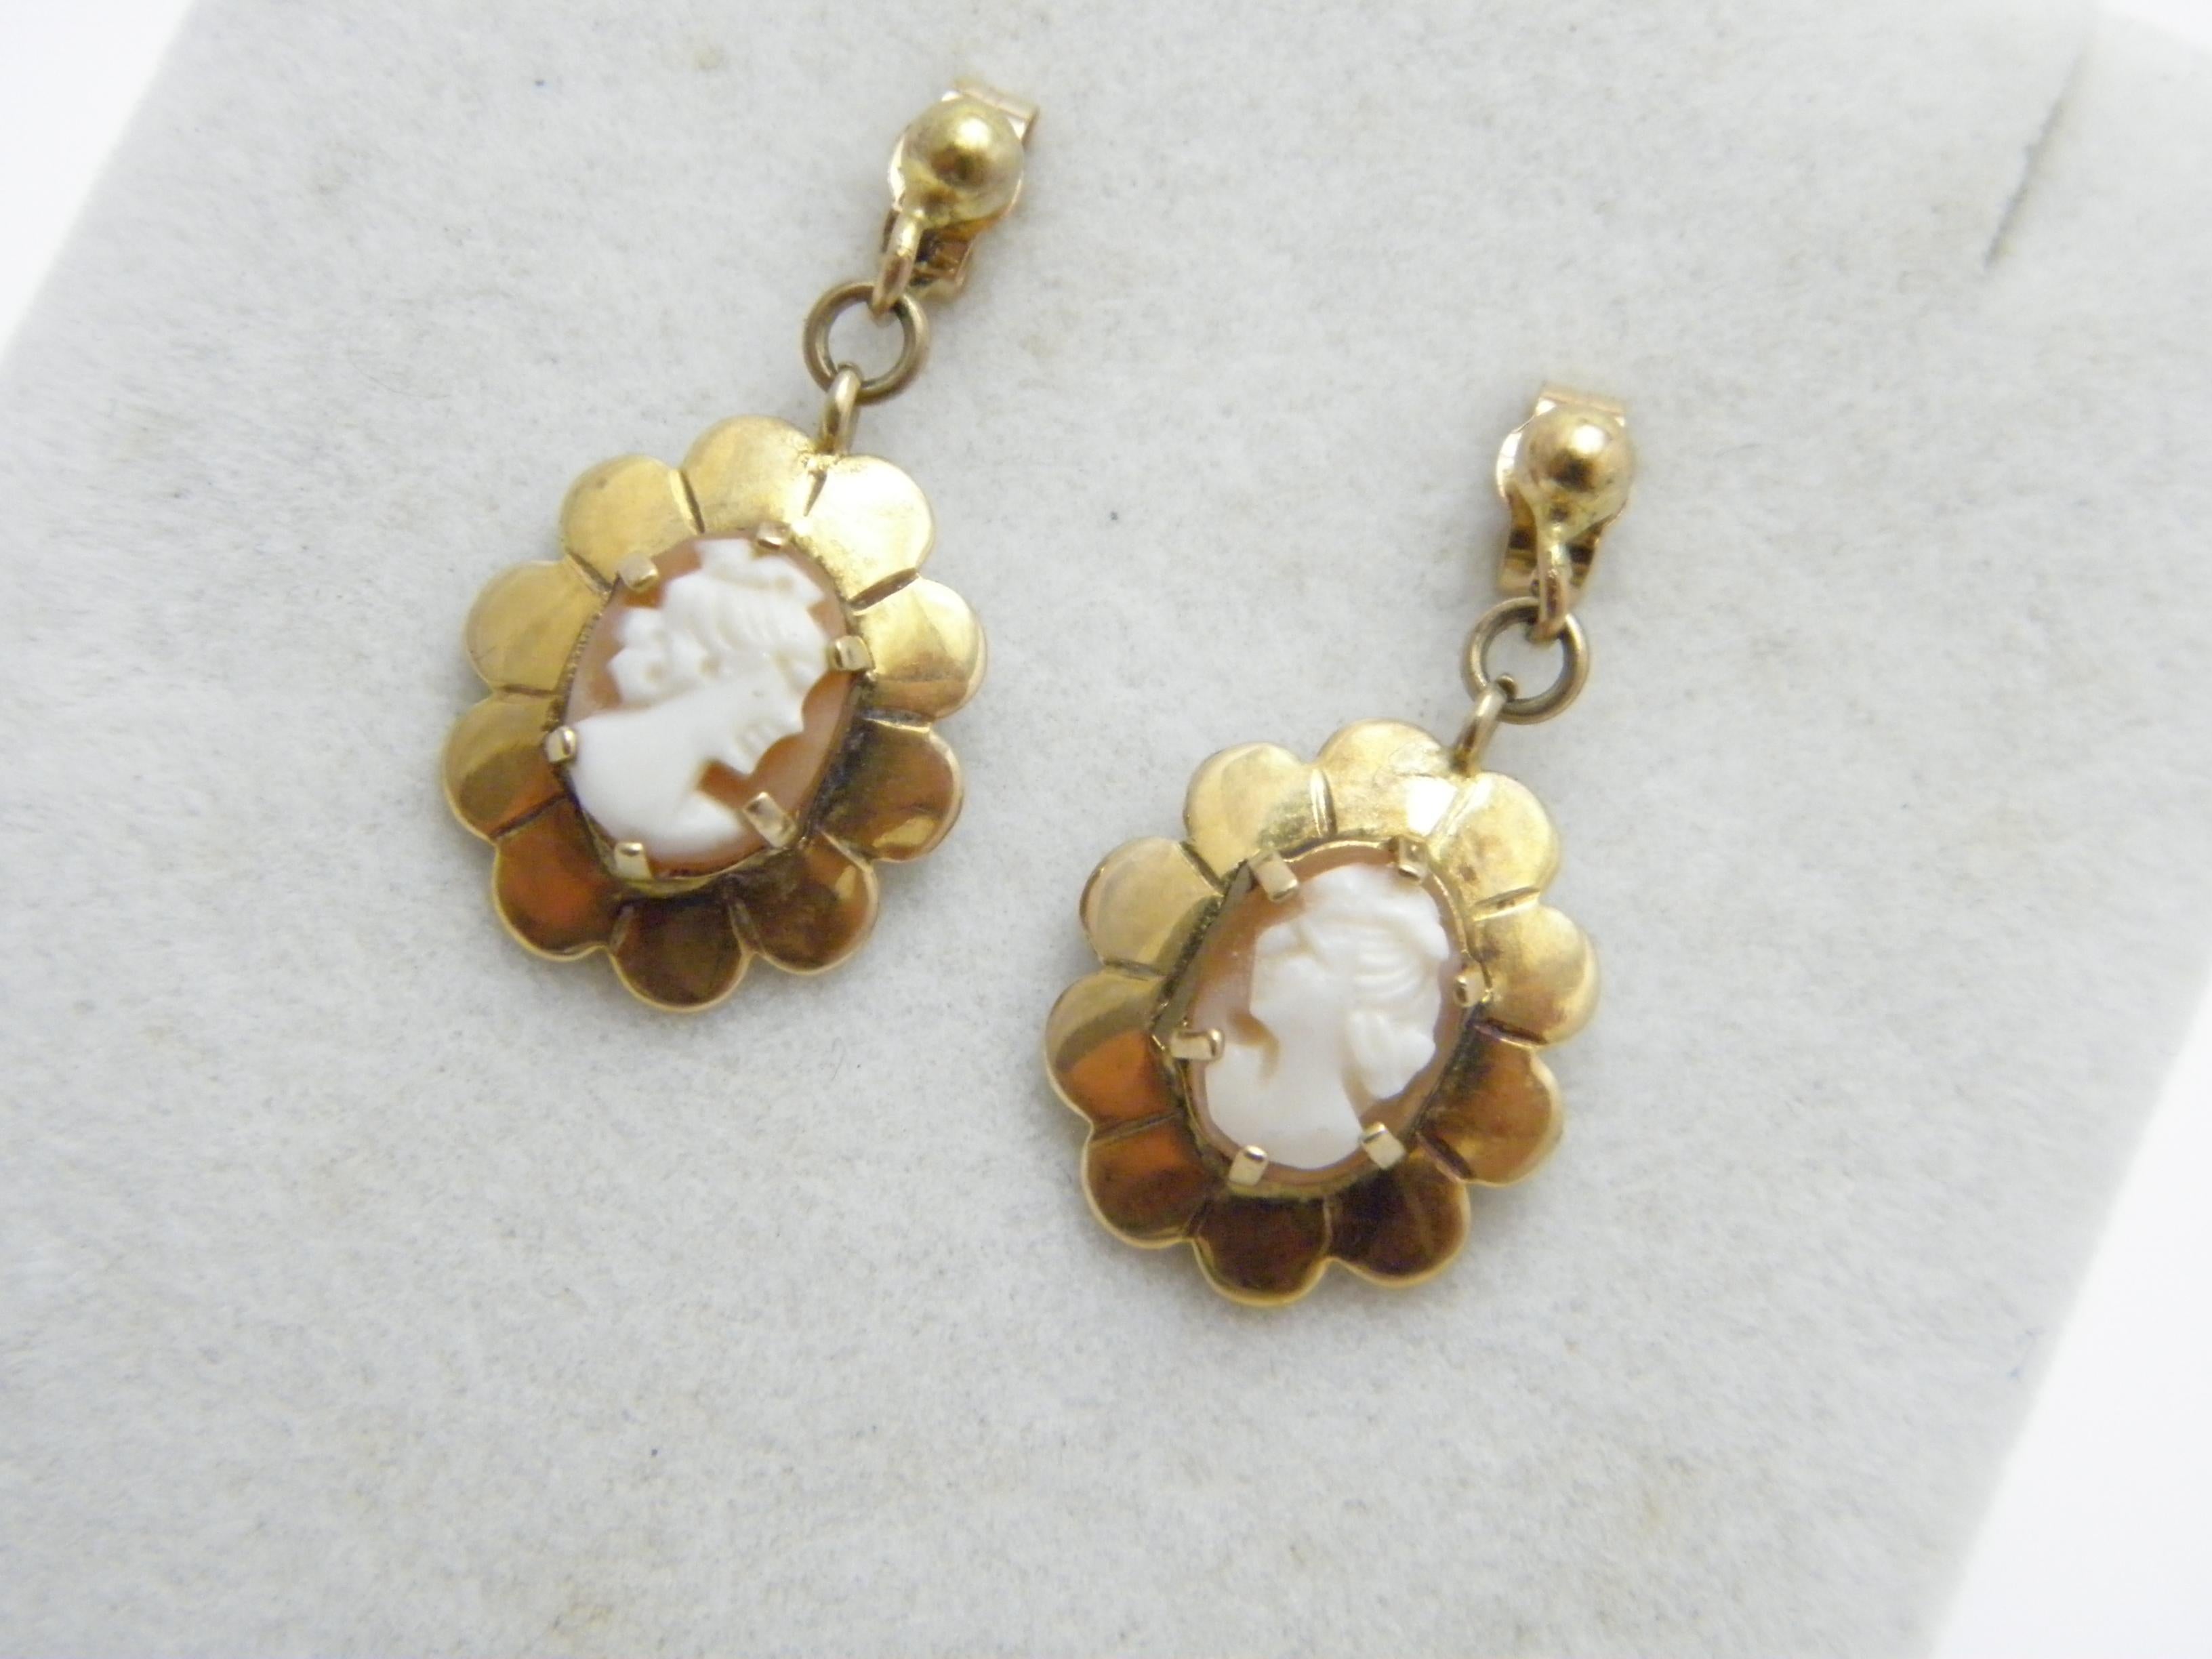 A very special item for you to consider:

9CT HEAVY GOLD CARVED SHELL CAMEO LARGE DROP / DANGLE EARRINGS

DETAILS
Material: 375/1000 9ct Solid Gold
Style: Art Nouveau style Cameo set stud and drop earrings
Gems: Hand carved conch shell cameos with